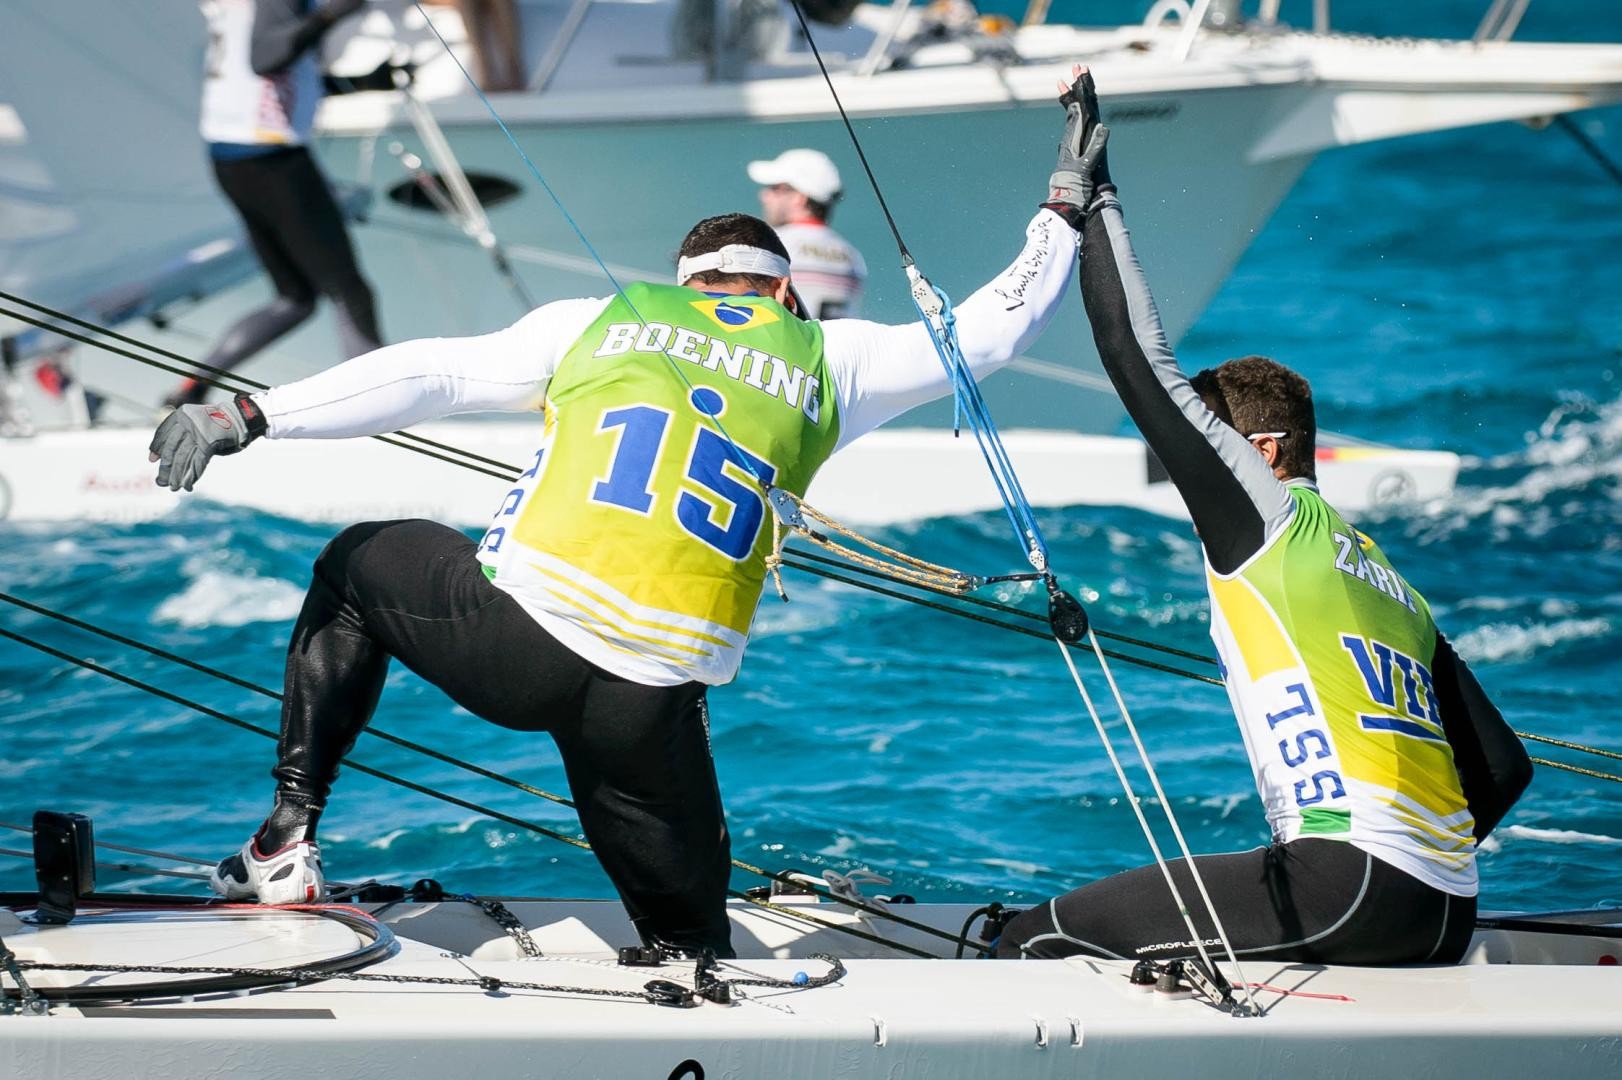 Jorge Zarif has worn a few yellow jerseys this year and stood on top of the podium in some Finn regattas, he is on the right track for an Olympic meda